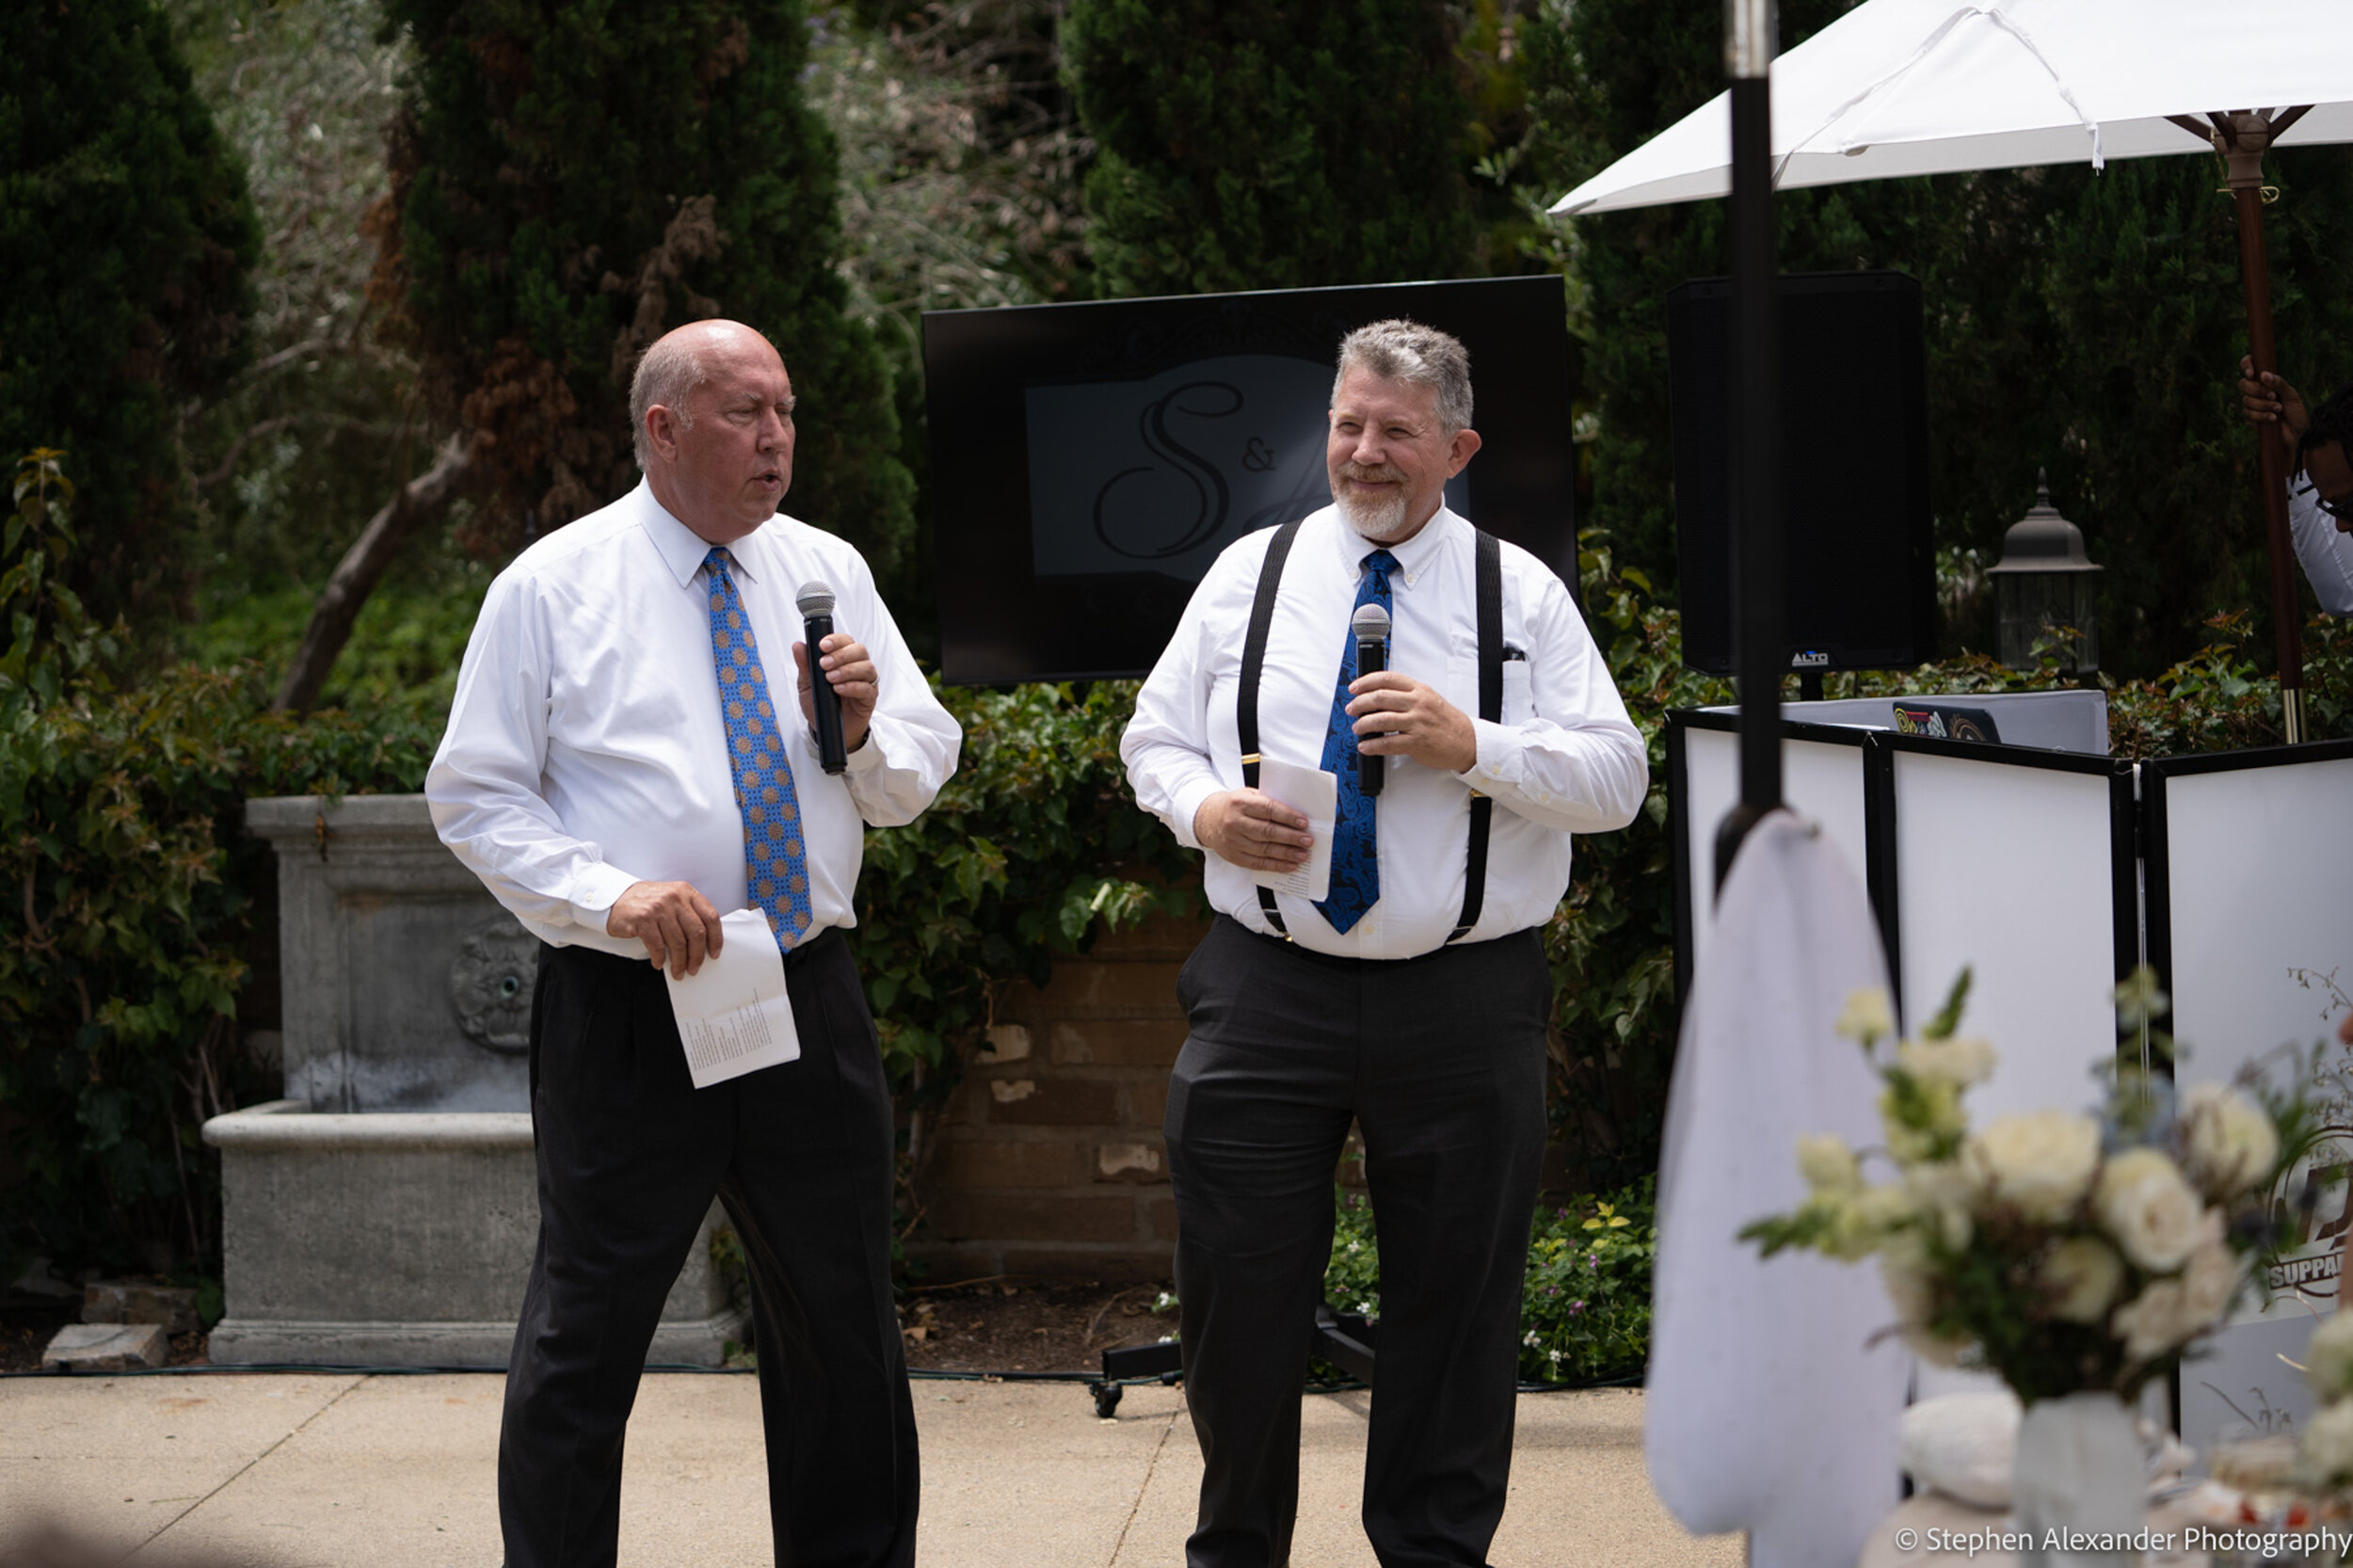 The Dads Serenading the newlyweds